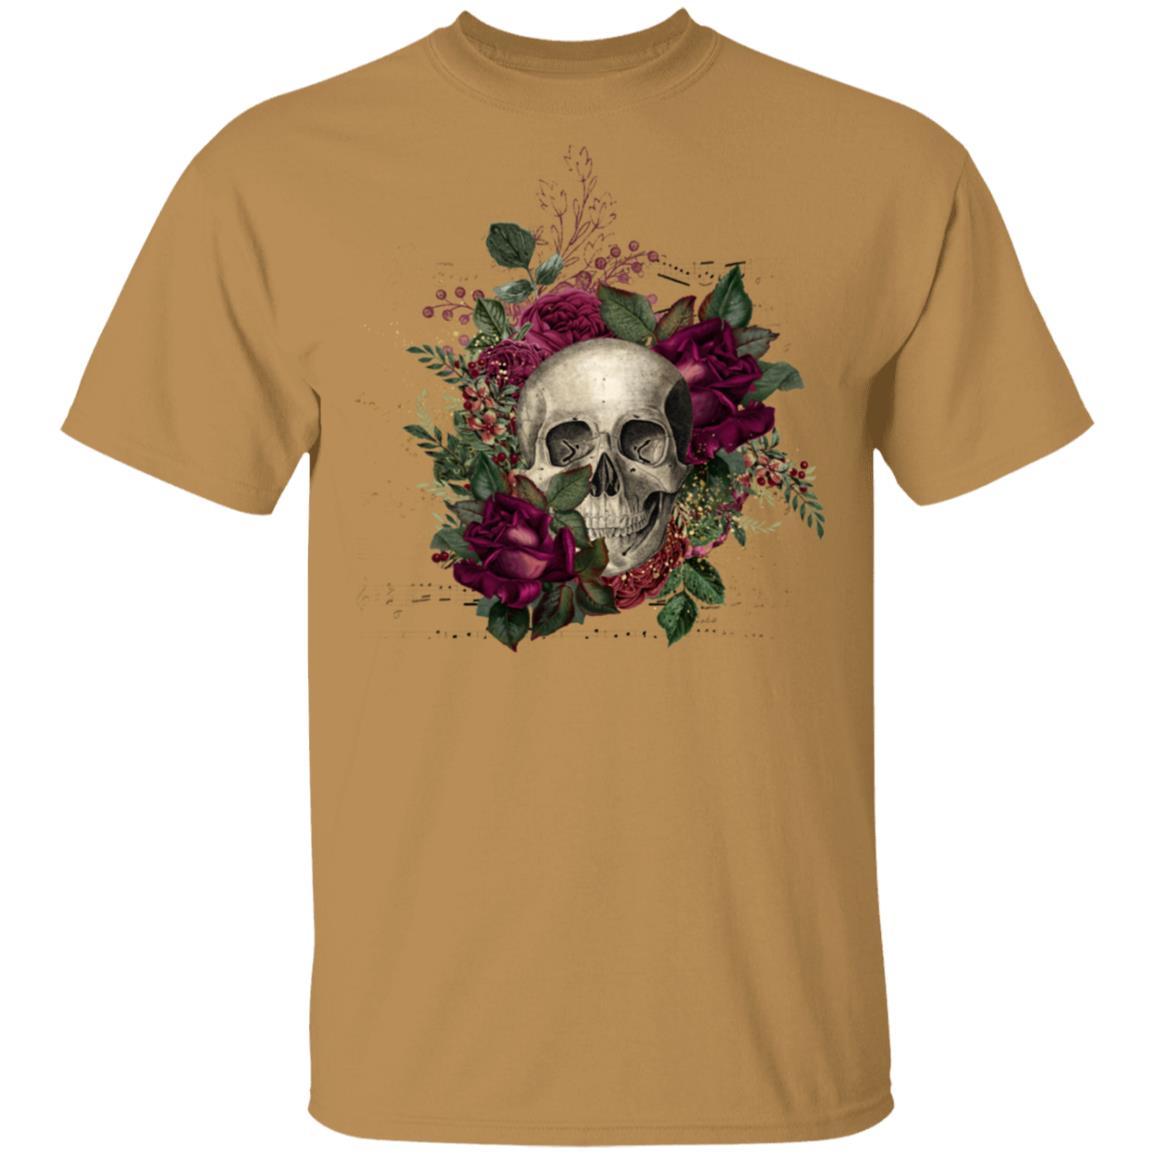 T-Shirts Old Gold / S Winey Bitches Co Skull Design #2 5.3 oz. T-Shirt WineyBitchesCo